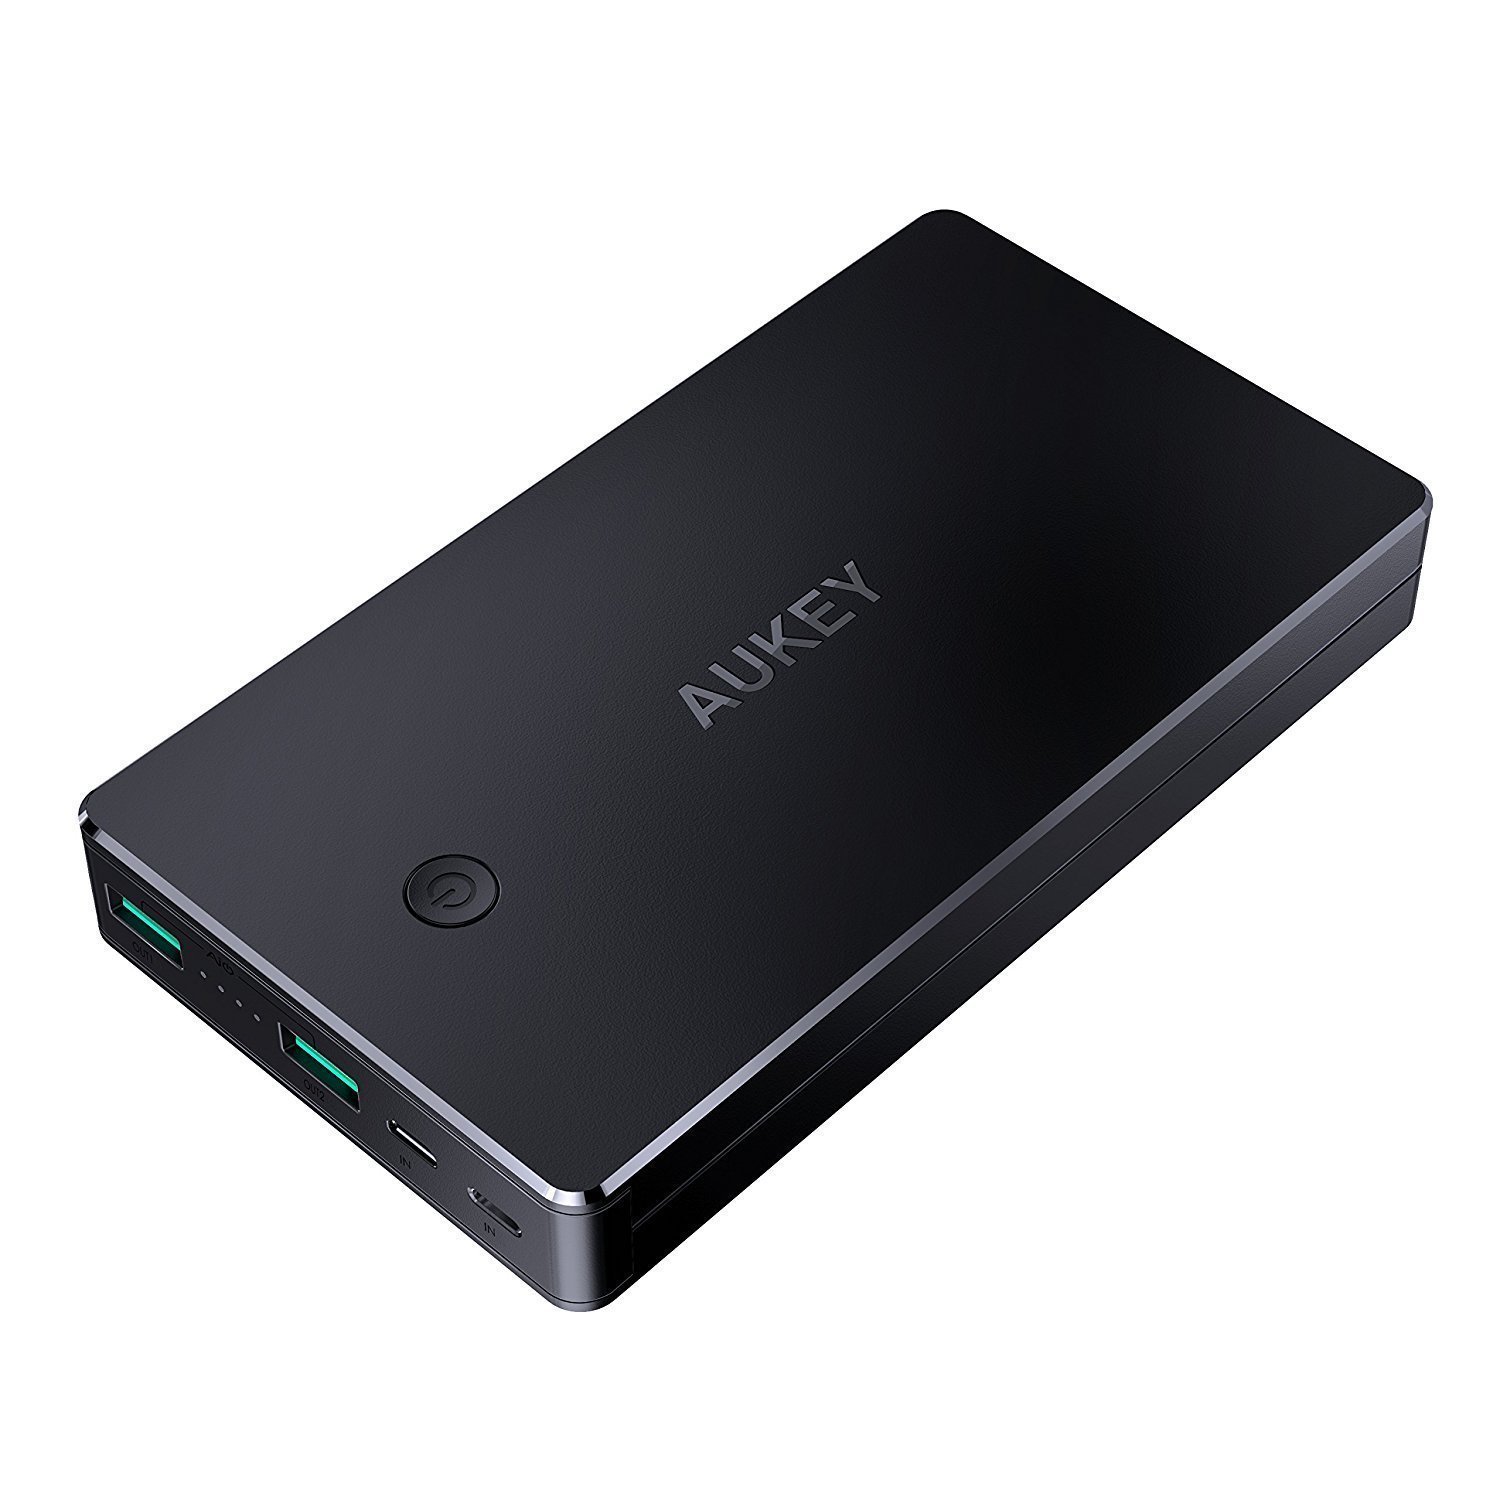 Aukey 20000mAh Power Bank with Lightning & Micro Input Portable Charger, 3.4A Dual-USB Output Battery Pack for iPhone X / 8 / Plus, iPad Pro and More